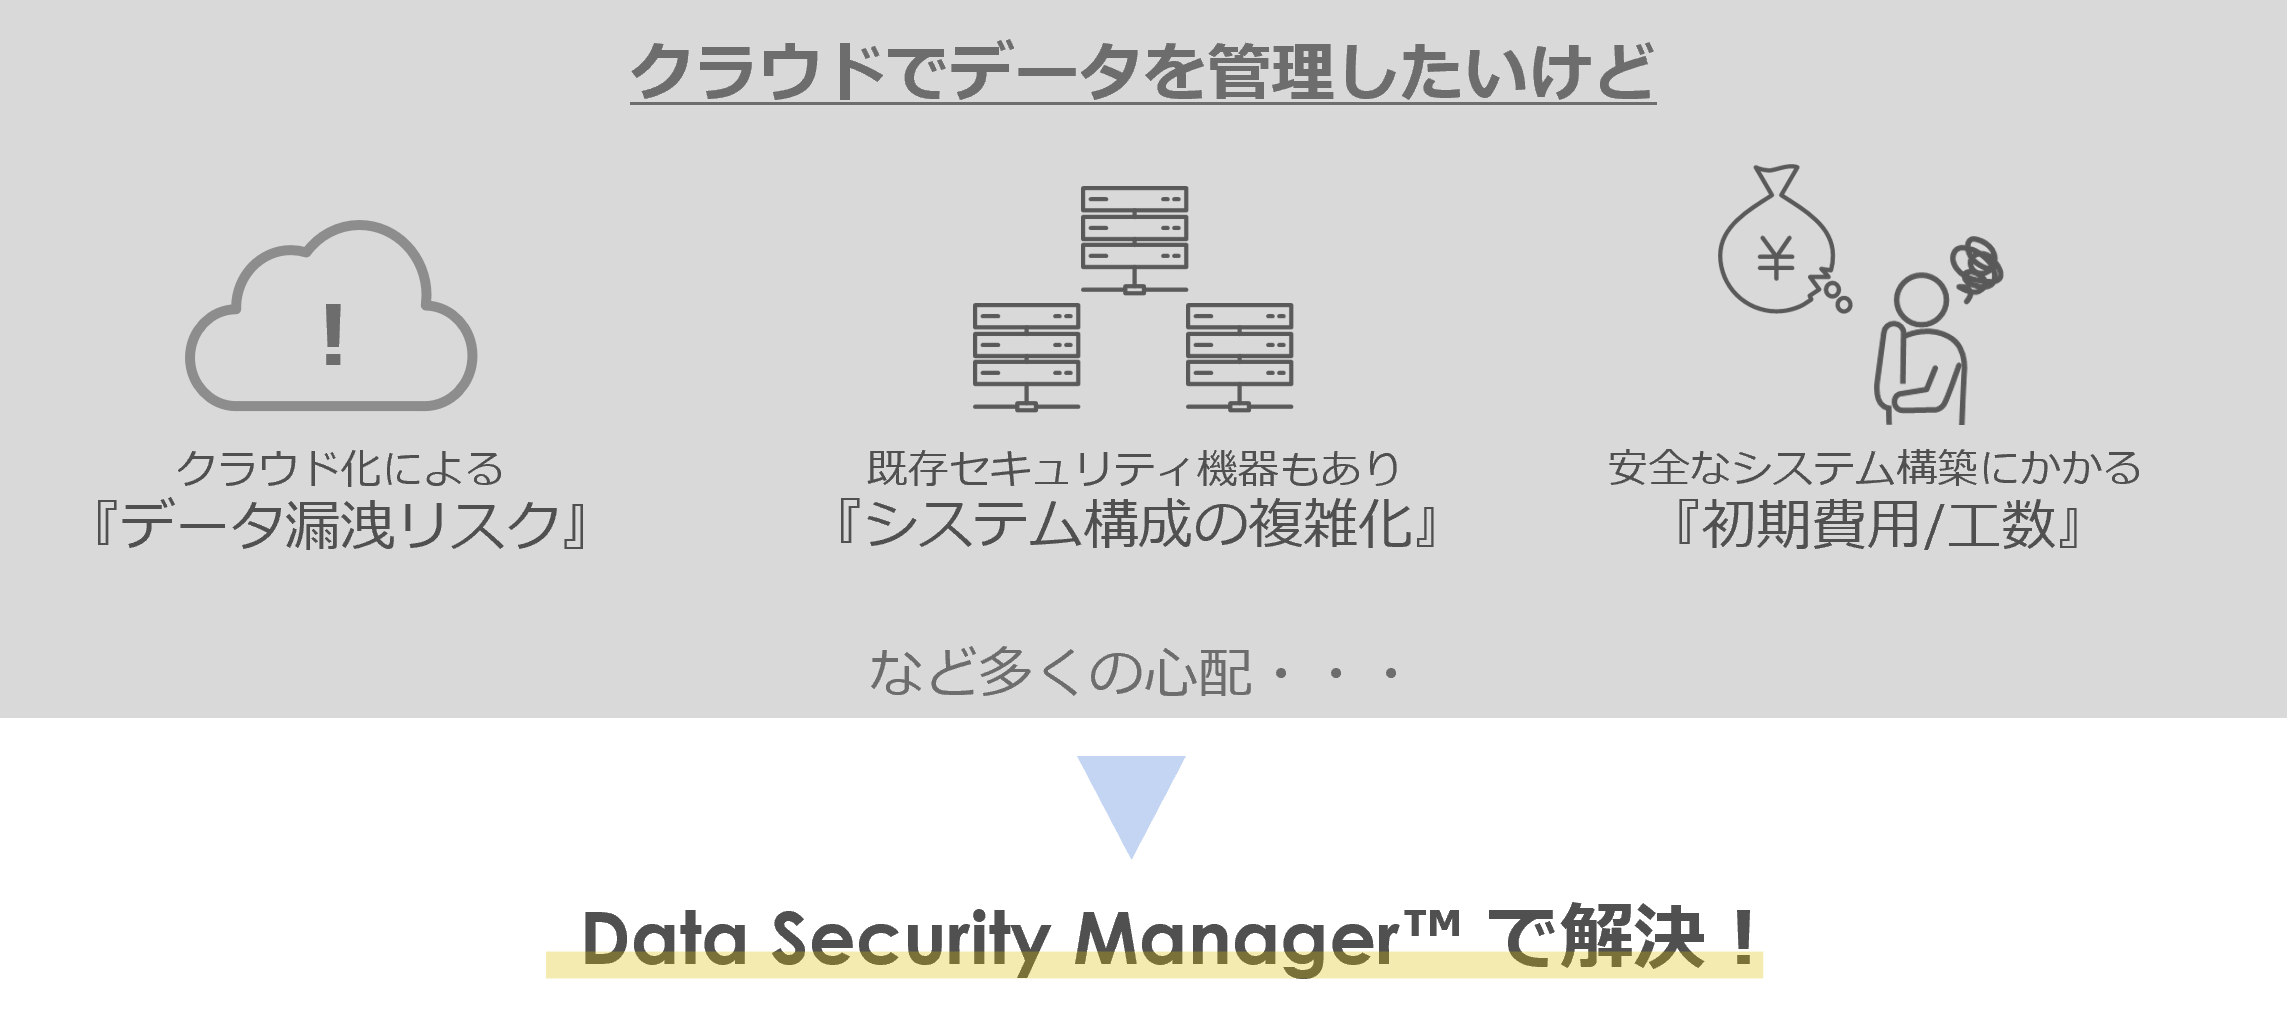 Data Security Manager™ solves the "complicated system configuration" due to the "risk of data leakage" due to cloud computing and existing security equipment, and the "initial cost/man-hours" required to build a secure system!